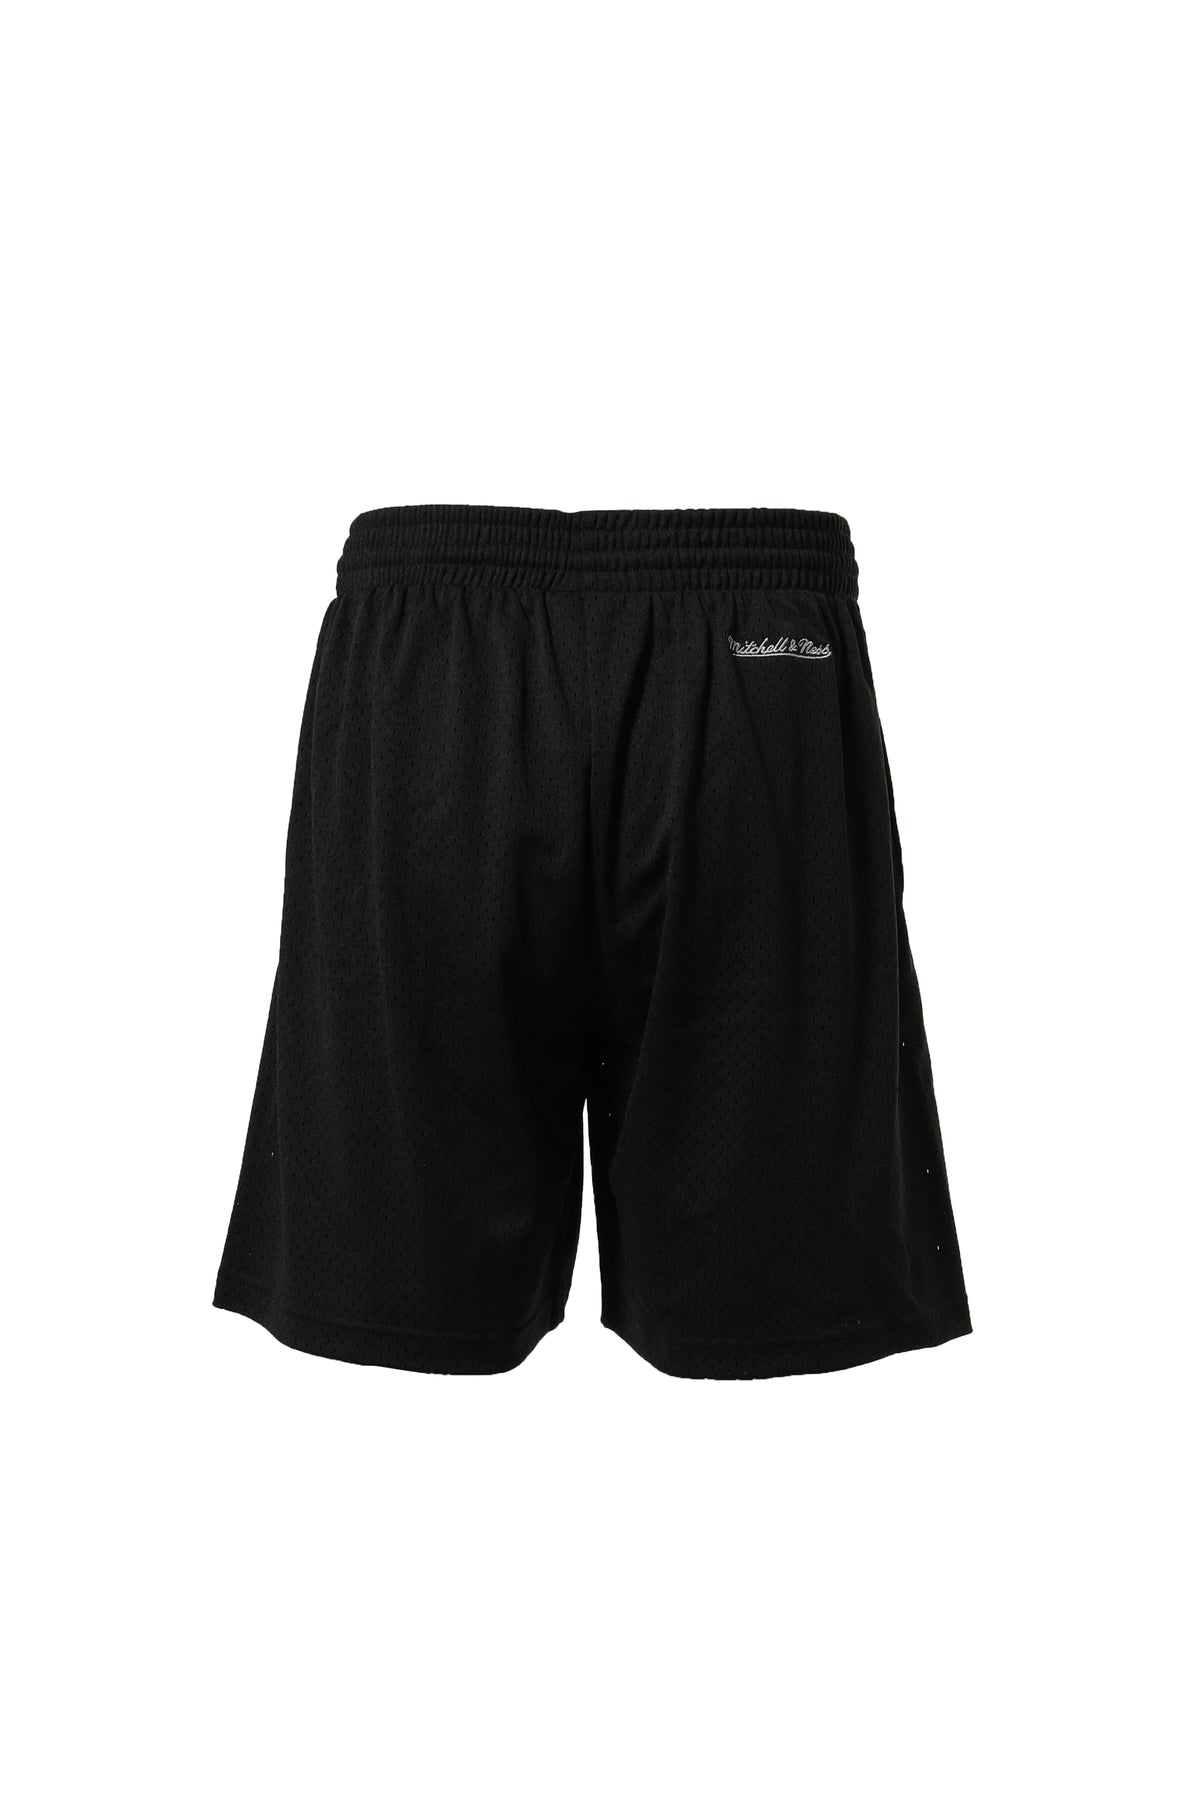 50TH AOHH LEGENDS SHORTS COLLAB(EXCLUSIVE) / BLK